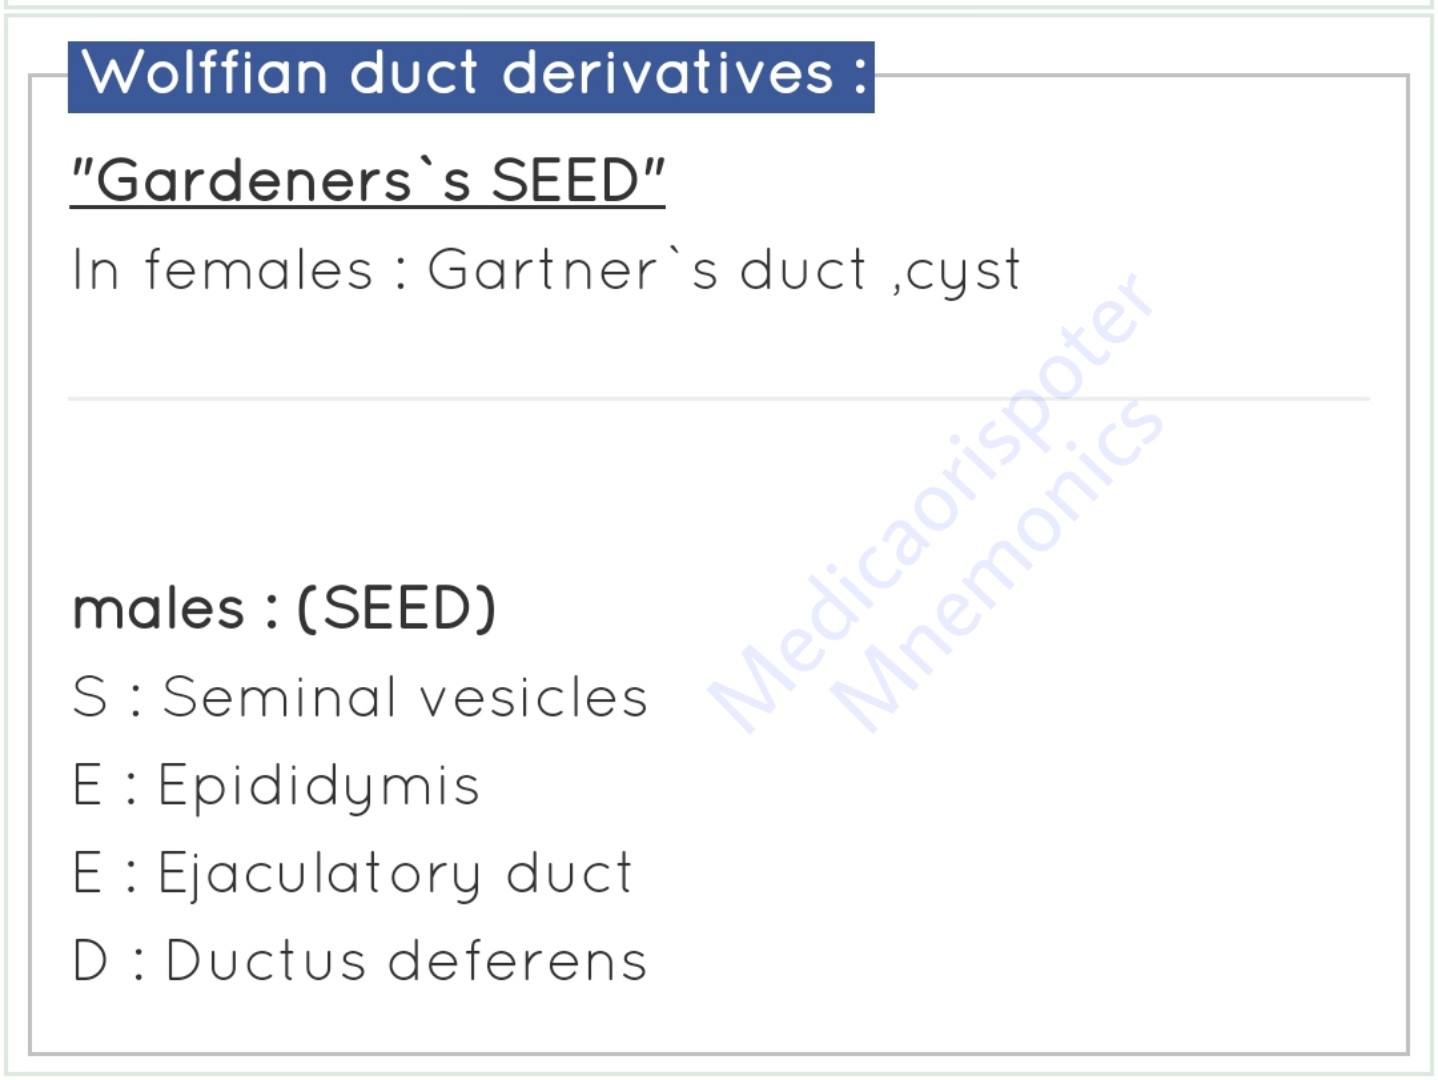 preview of Derivatives of Wolffian Duct.jpg